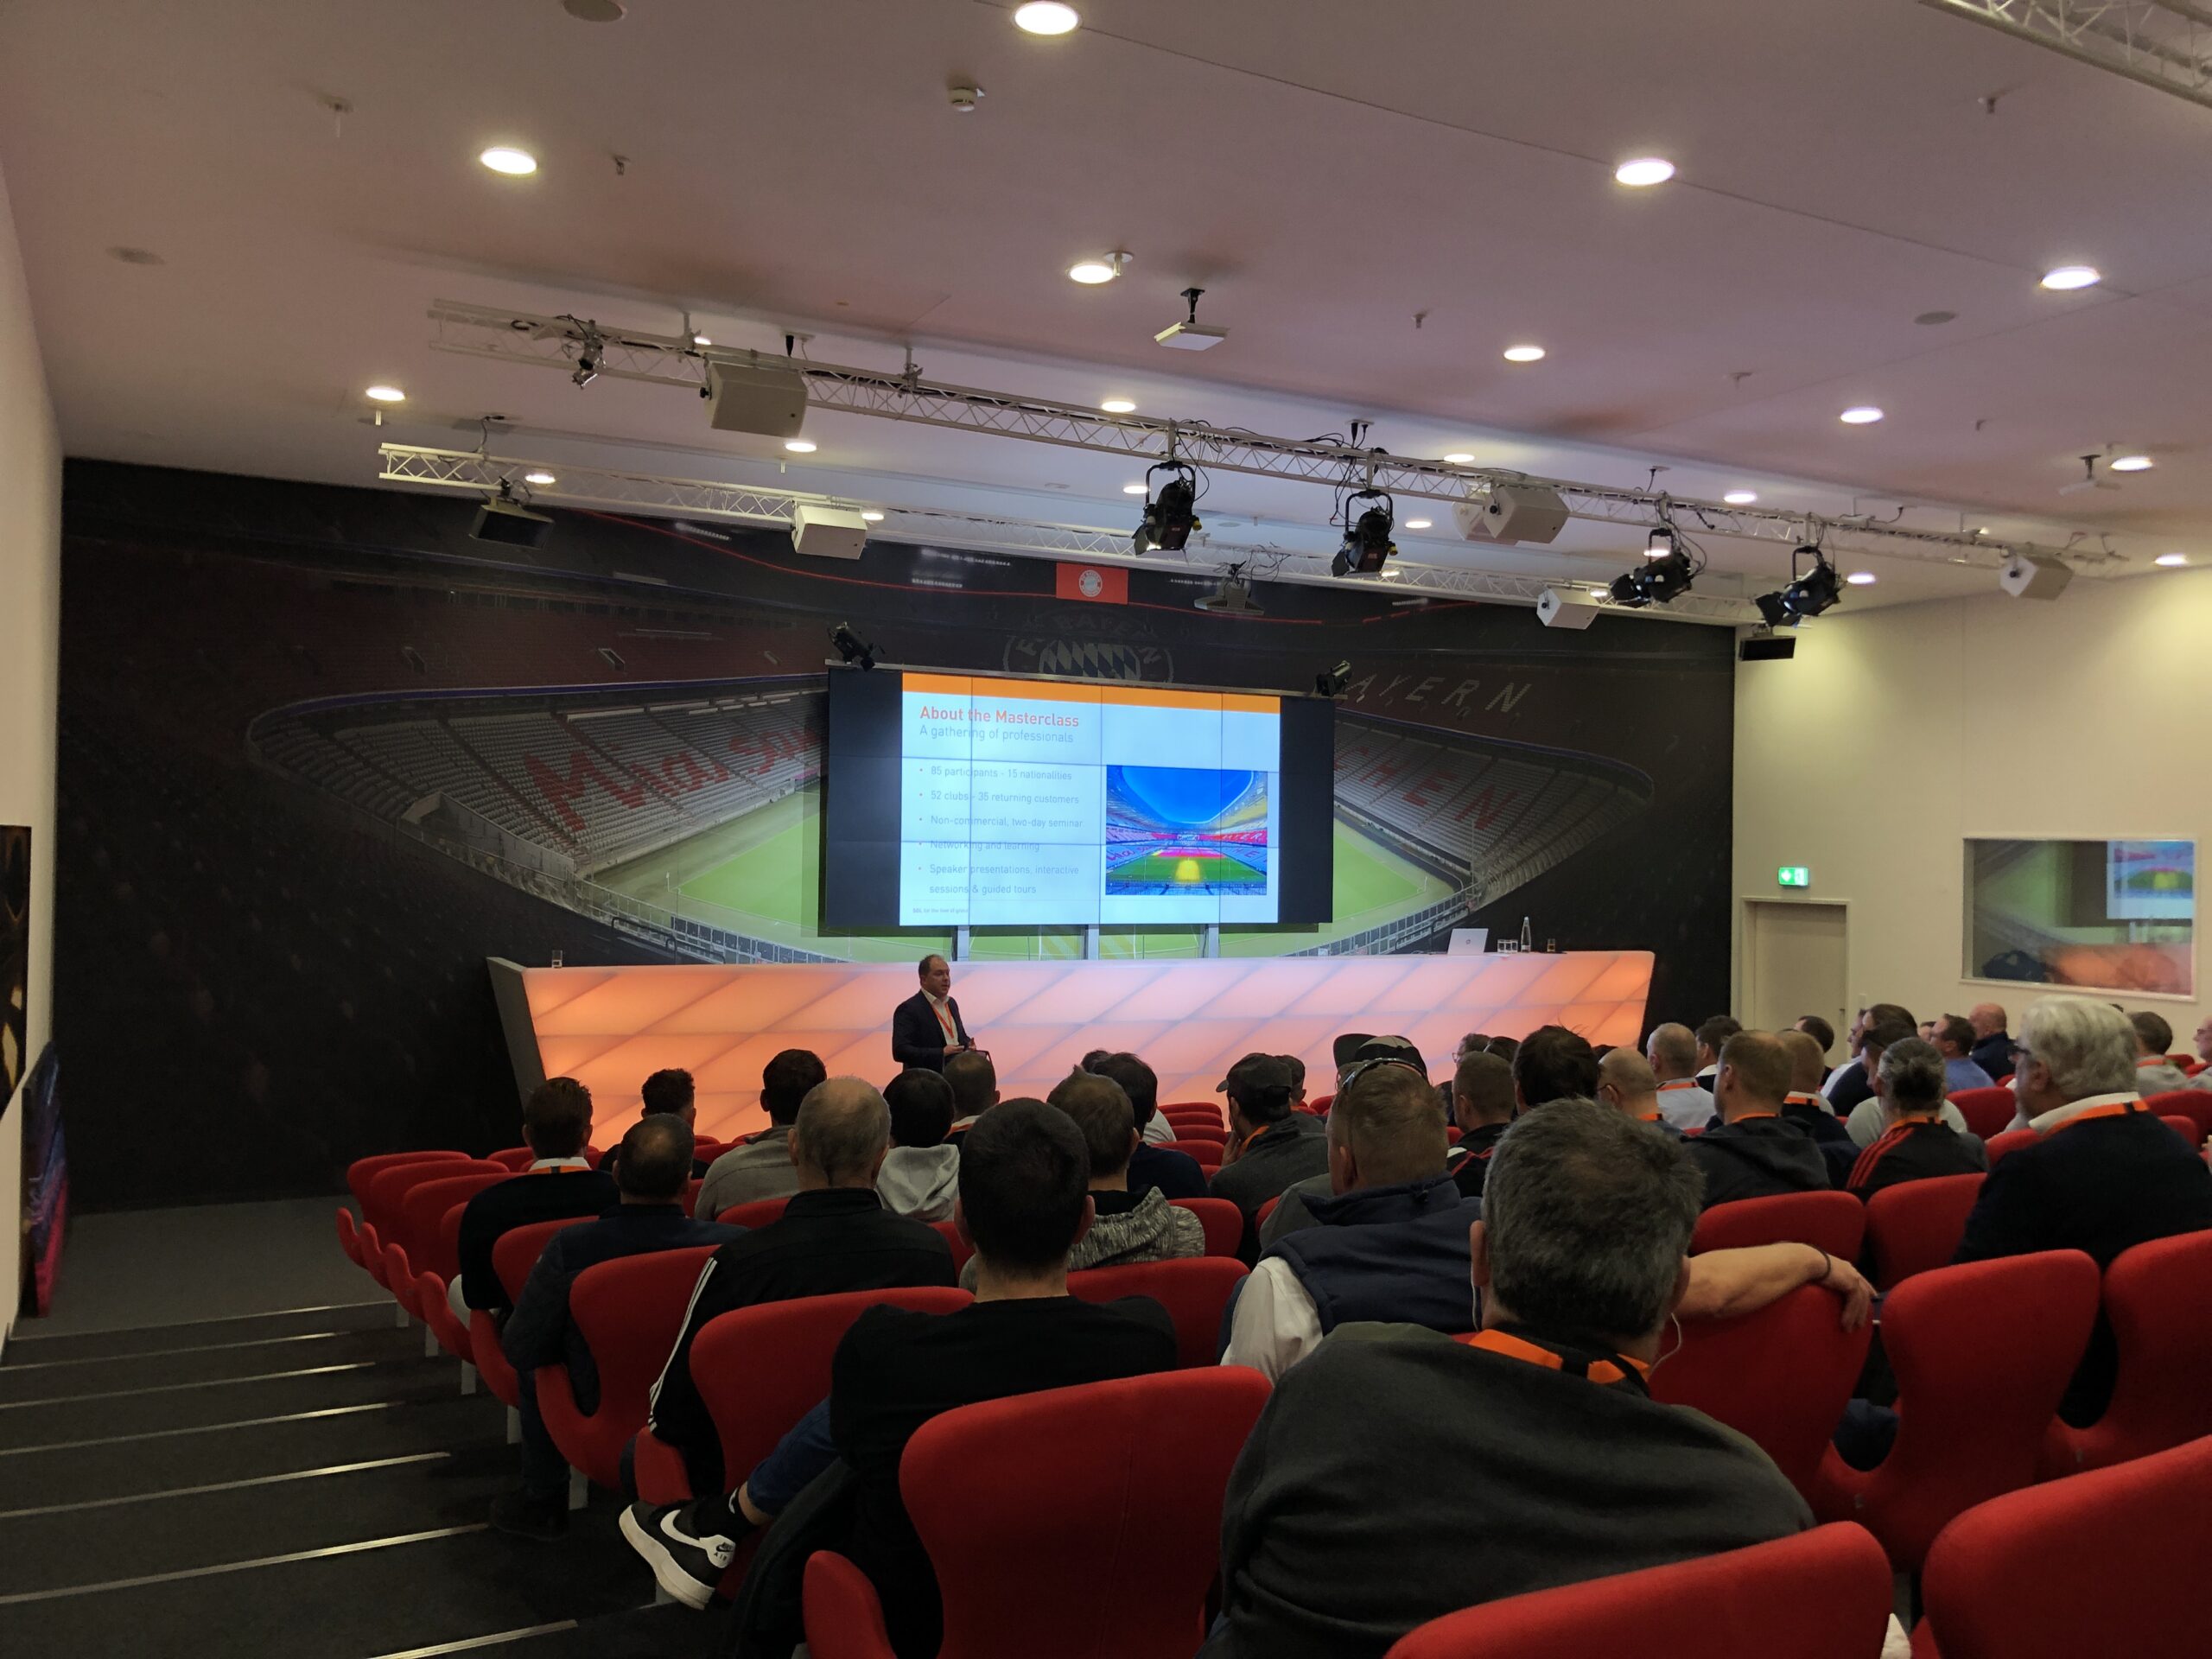 Masterclass attendees in the Allianz Arena press auditorium listening to a presentation from SGL.